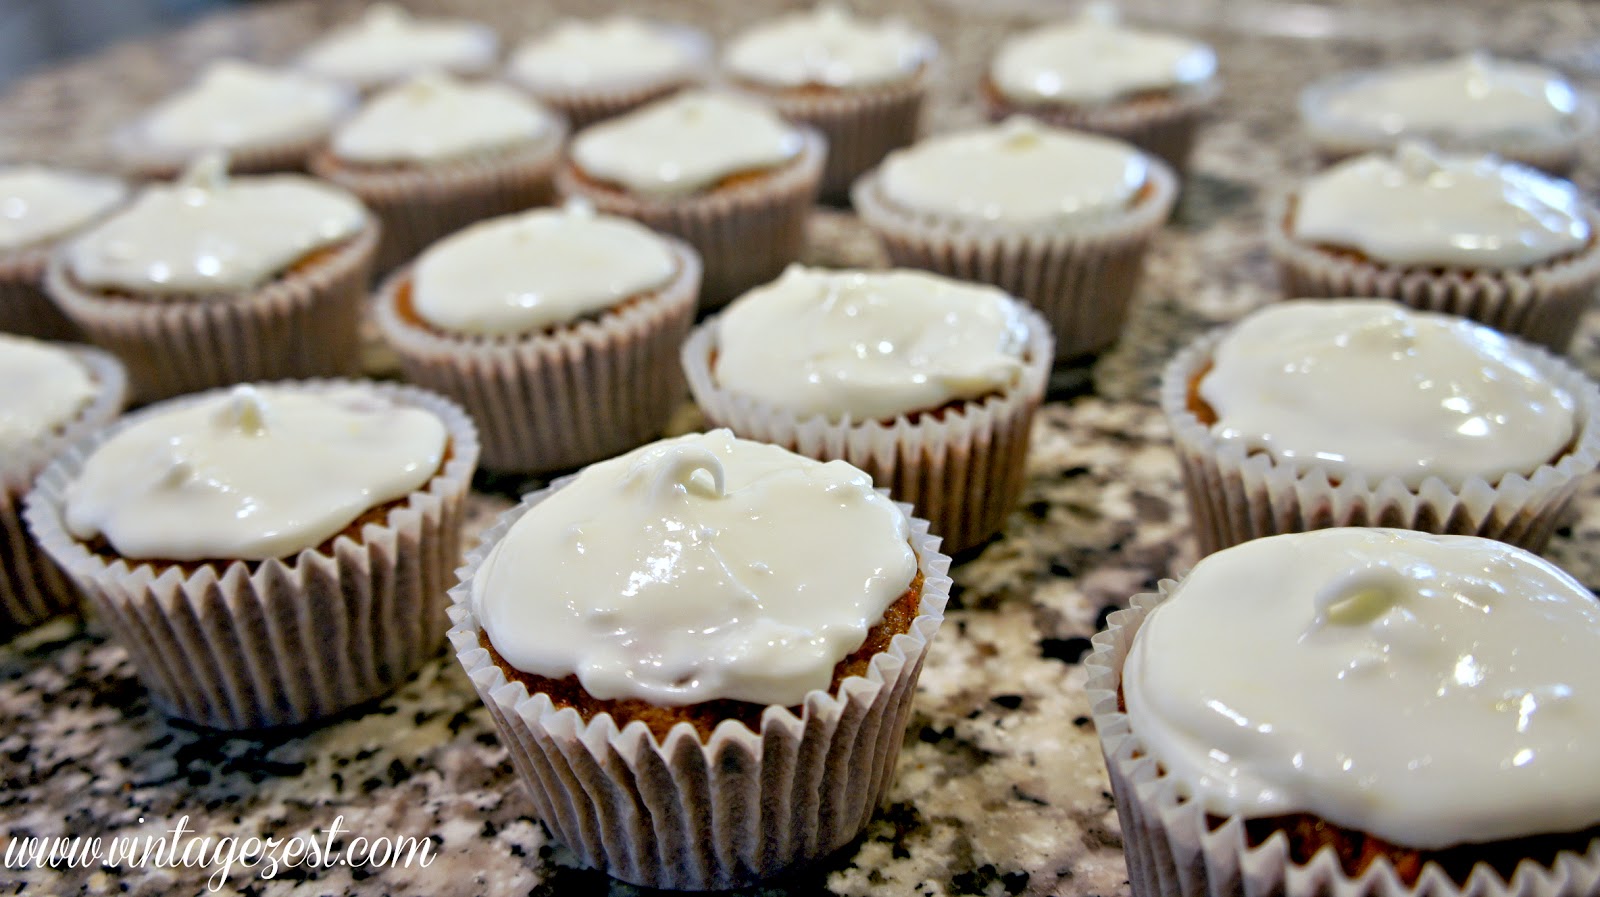 Cream Cheese Frosting with Carrot Cupcakes and Raisins